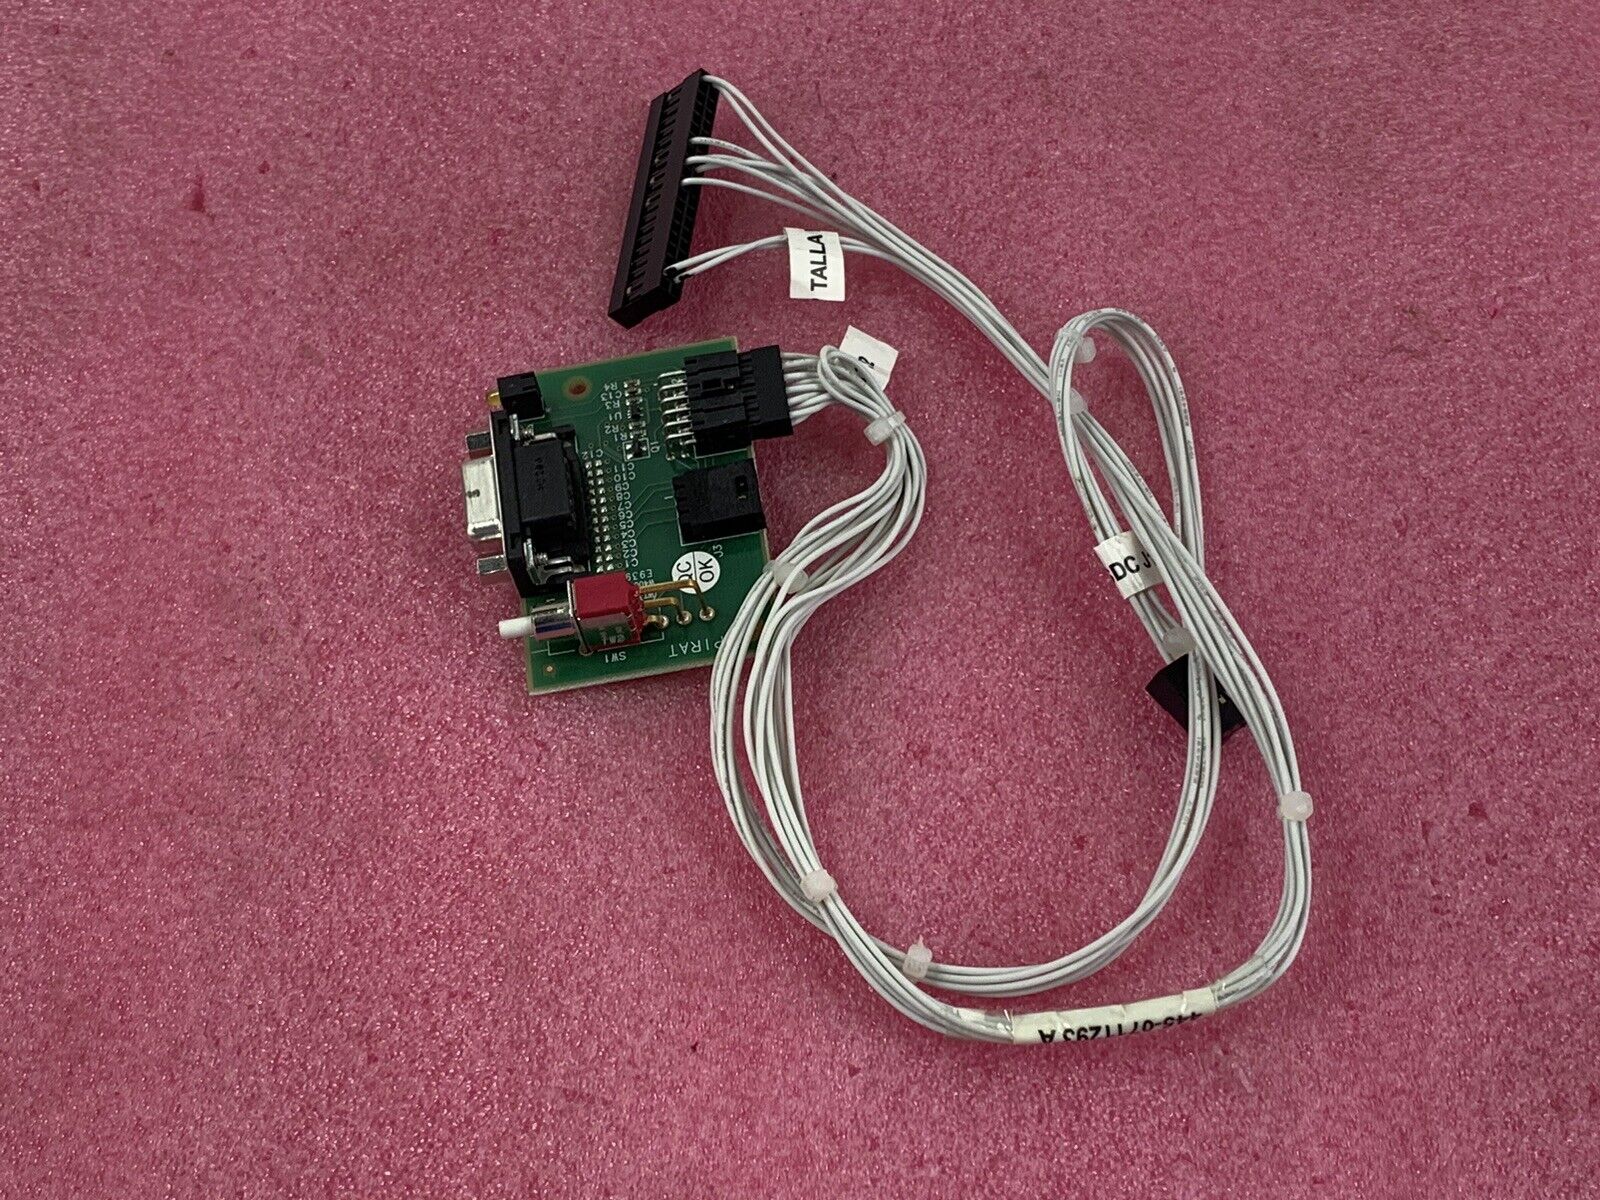 NCR Pirate Board 445-0711315 for ATMs w/Connection Cable